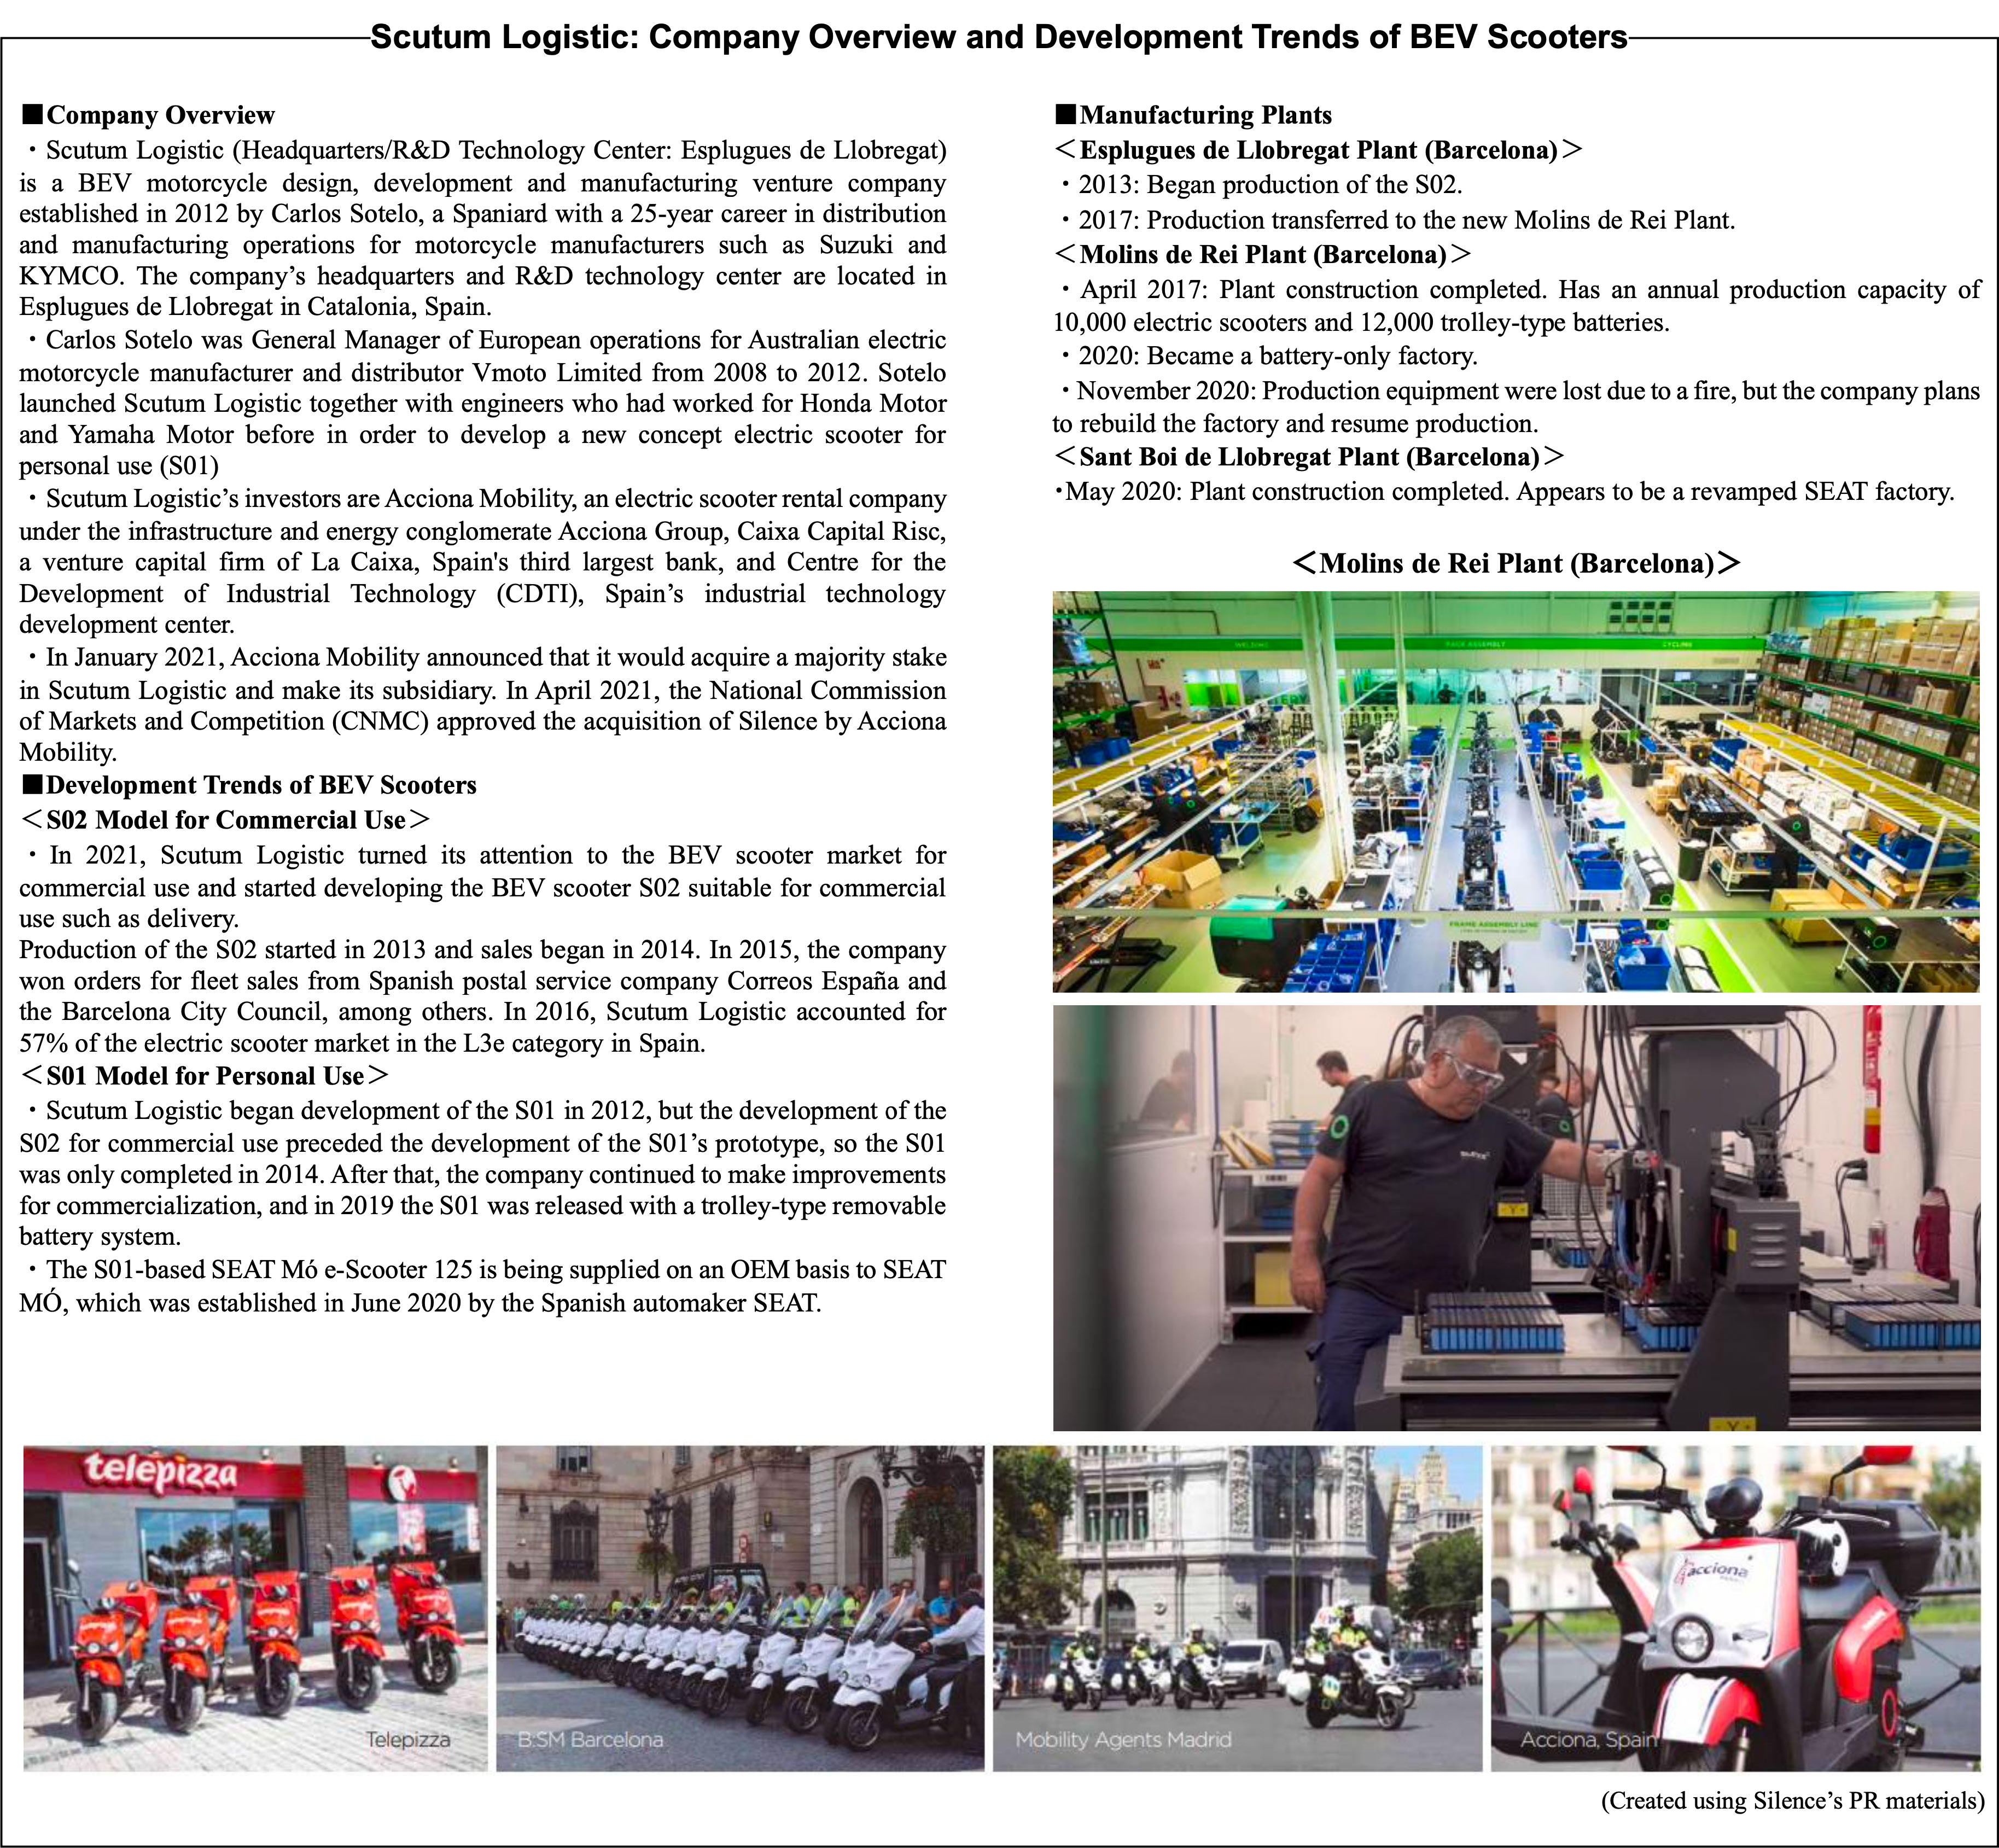 Scutum Logistic: Company Overview and Development Trends of BEV Scooters